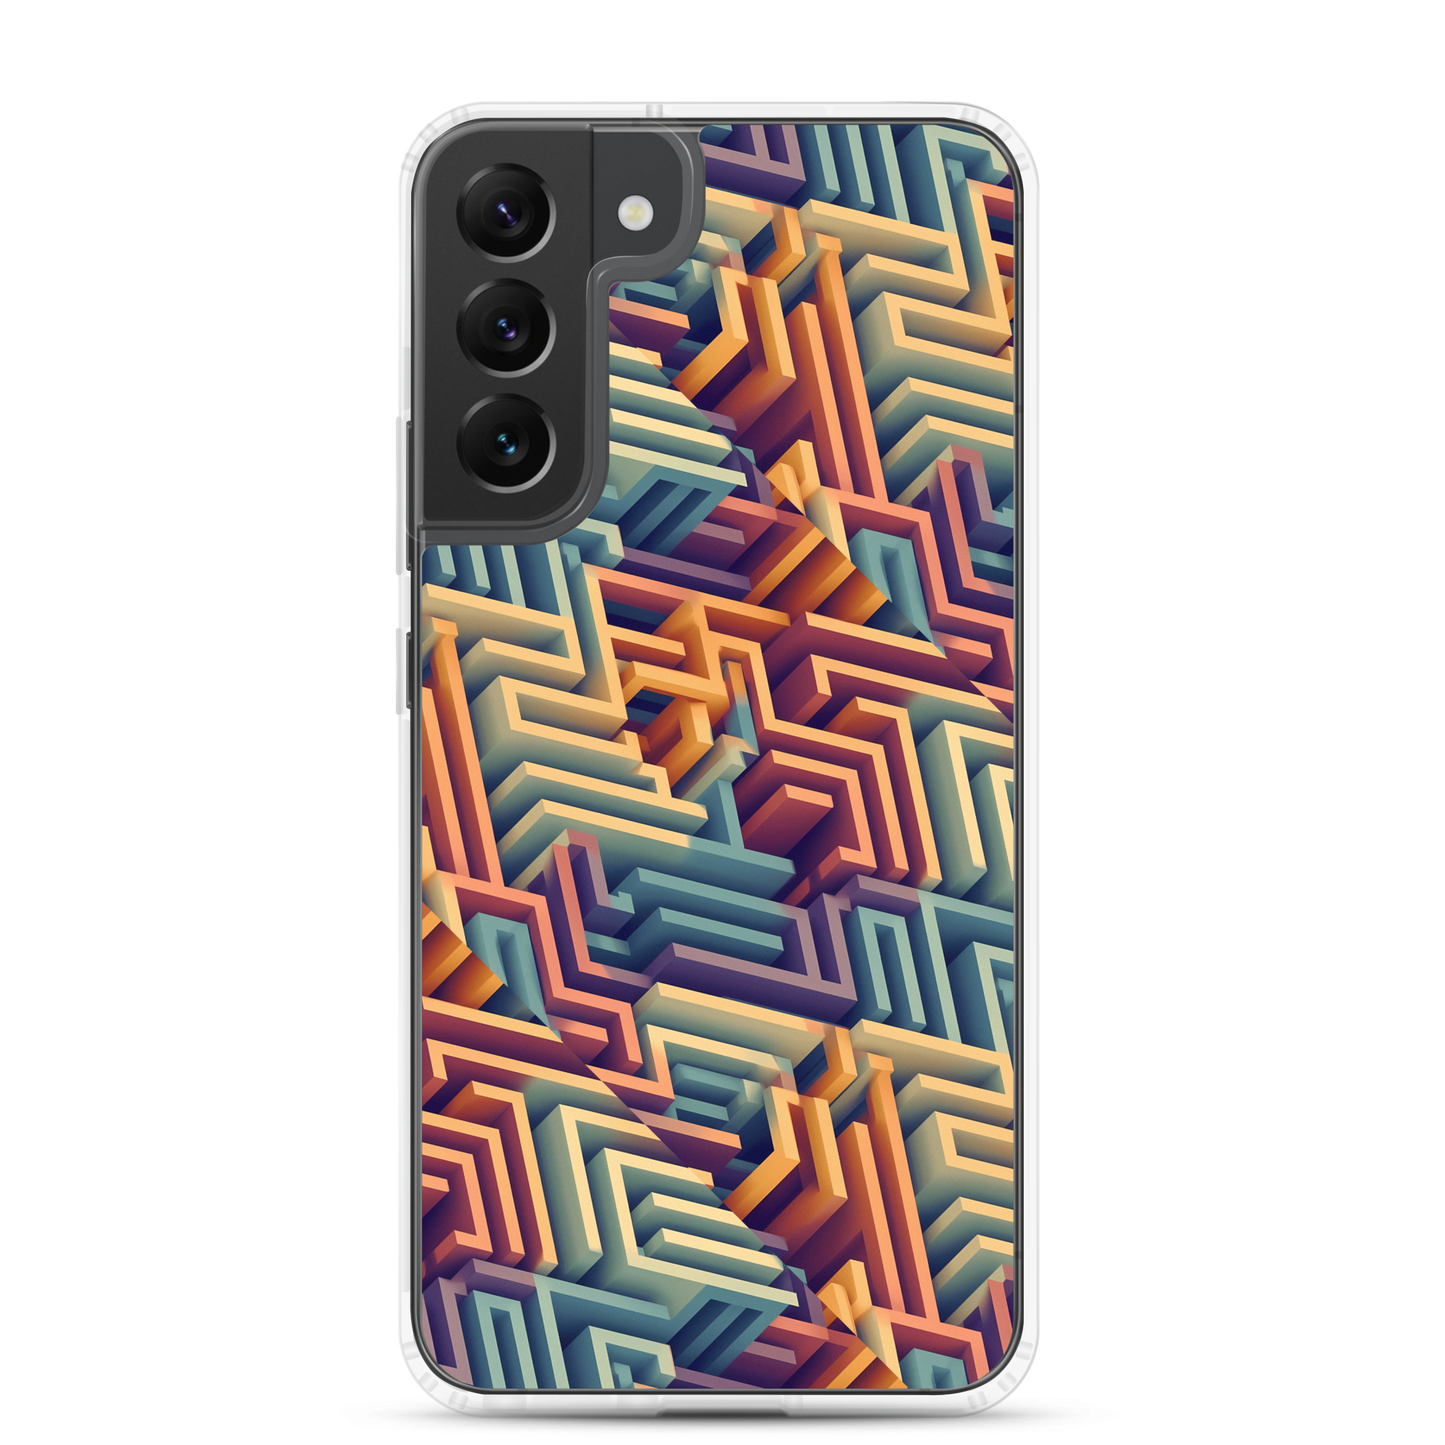 3D Maze Illusion | 3D Patterns | Clear Case for Samsung - #3